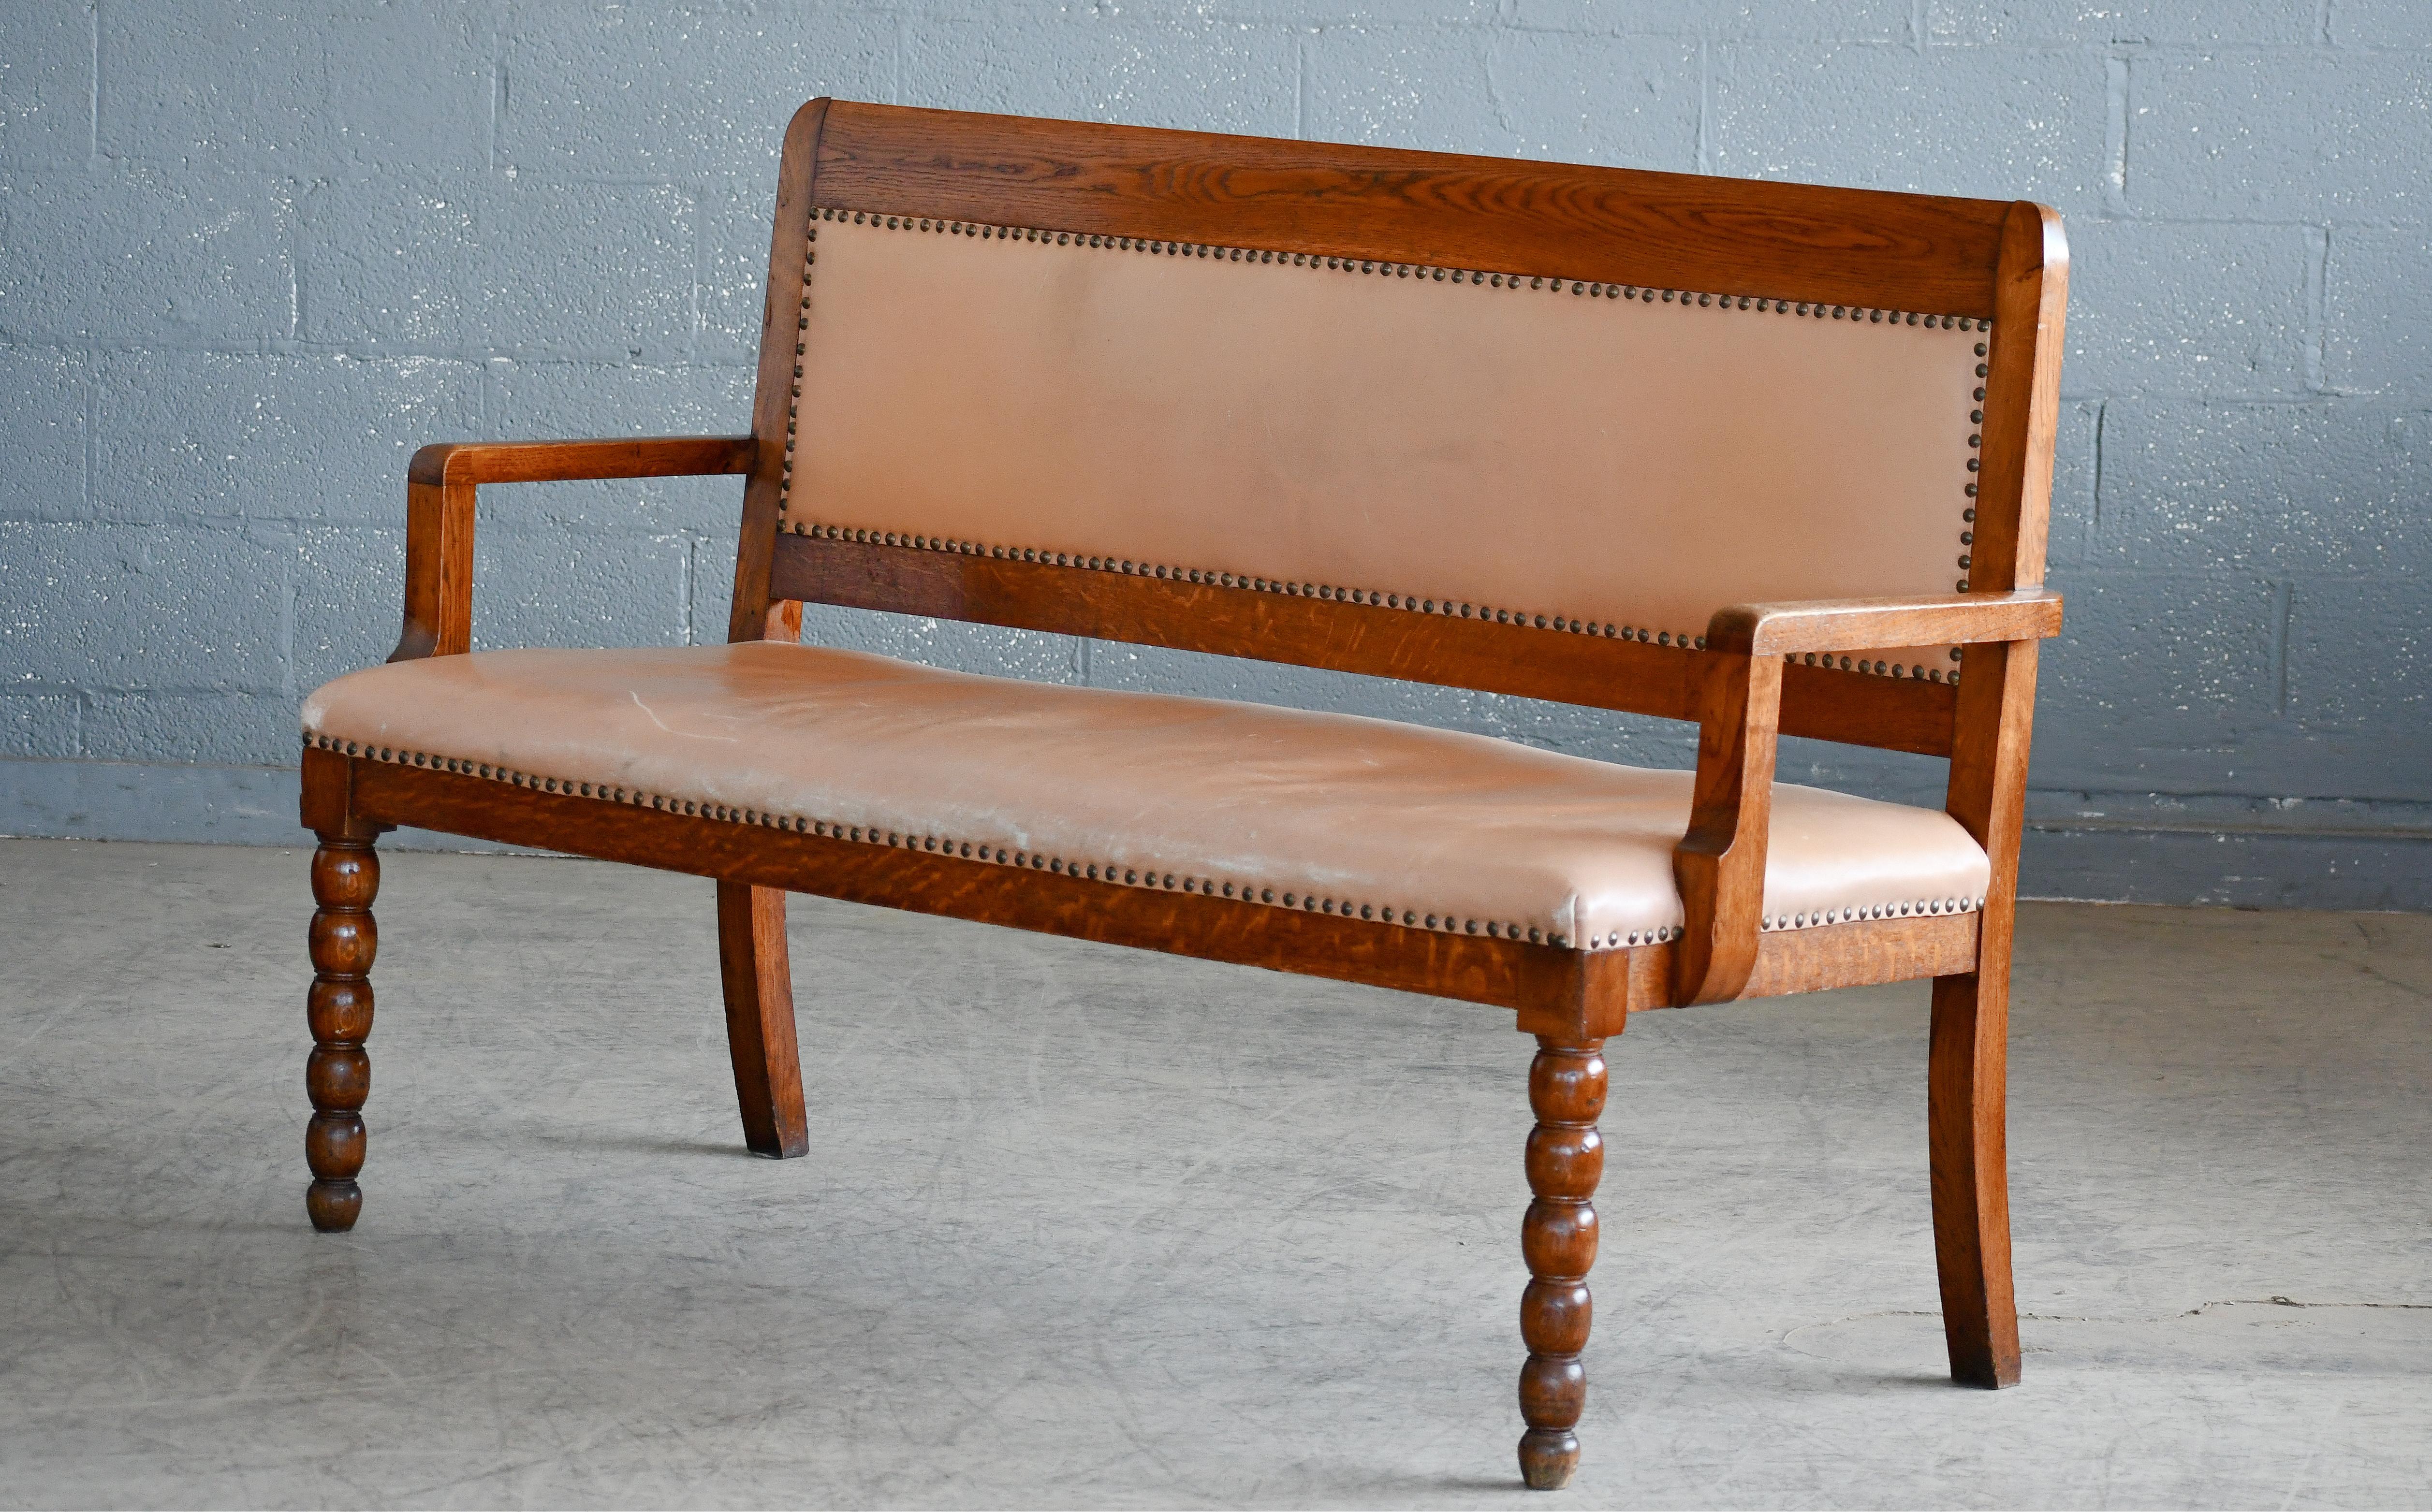 Rare bench from the nearly mid-century - probably made in the 1920 from carved oak and later reupholstered in a tan leather. Simple yet very refined design with beautiful wood grain and patina. Leather showing some wear and patina but is in very